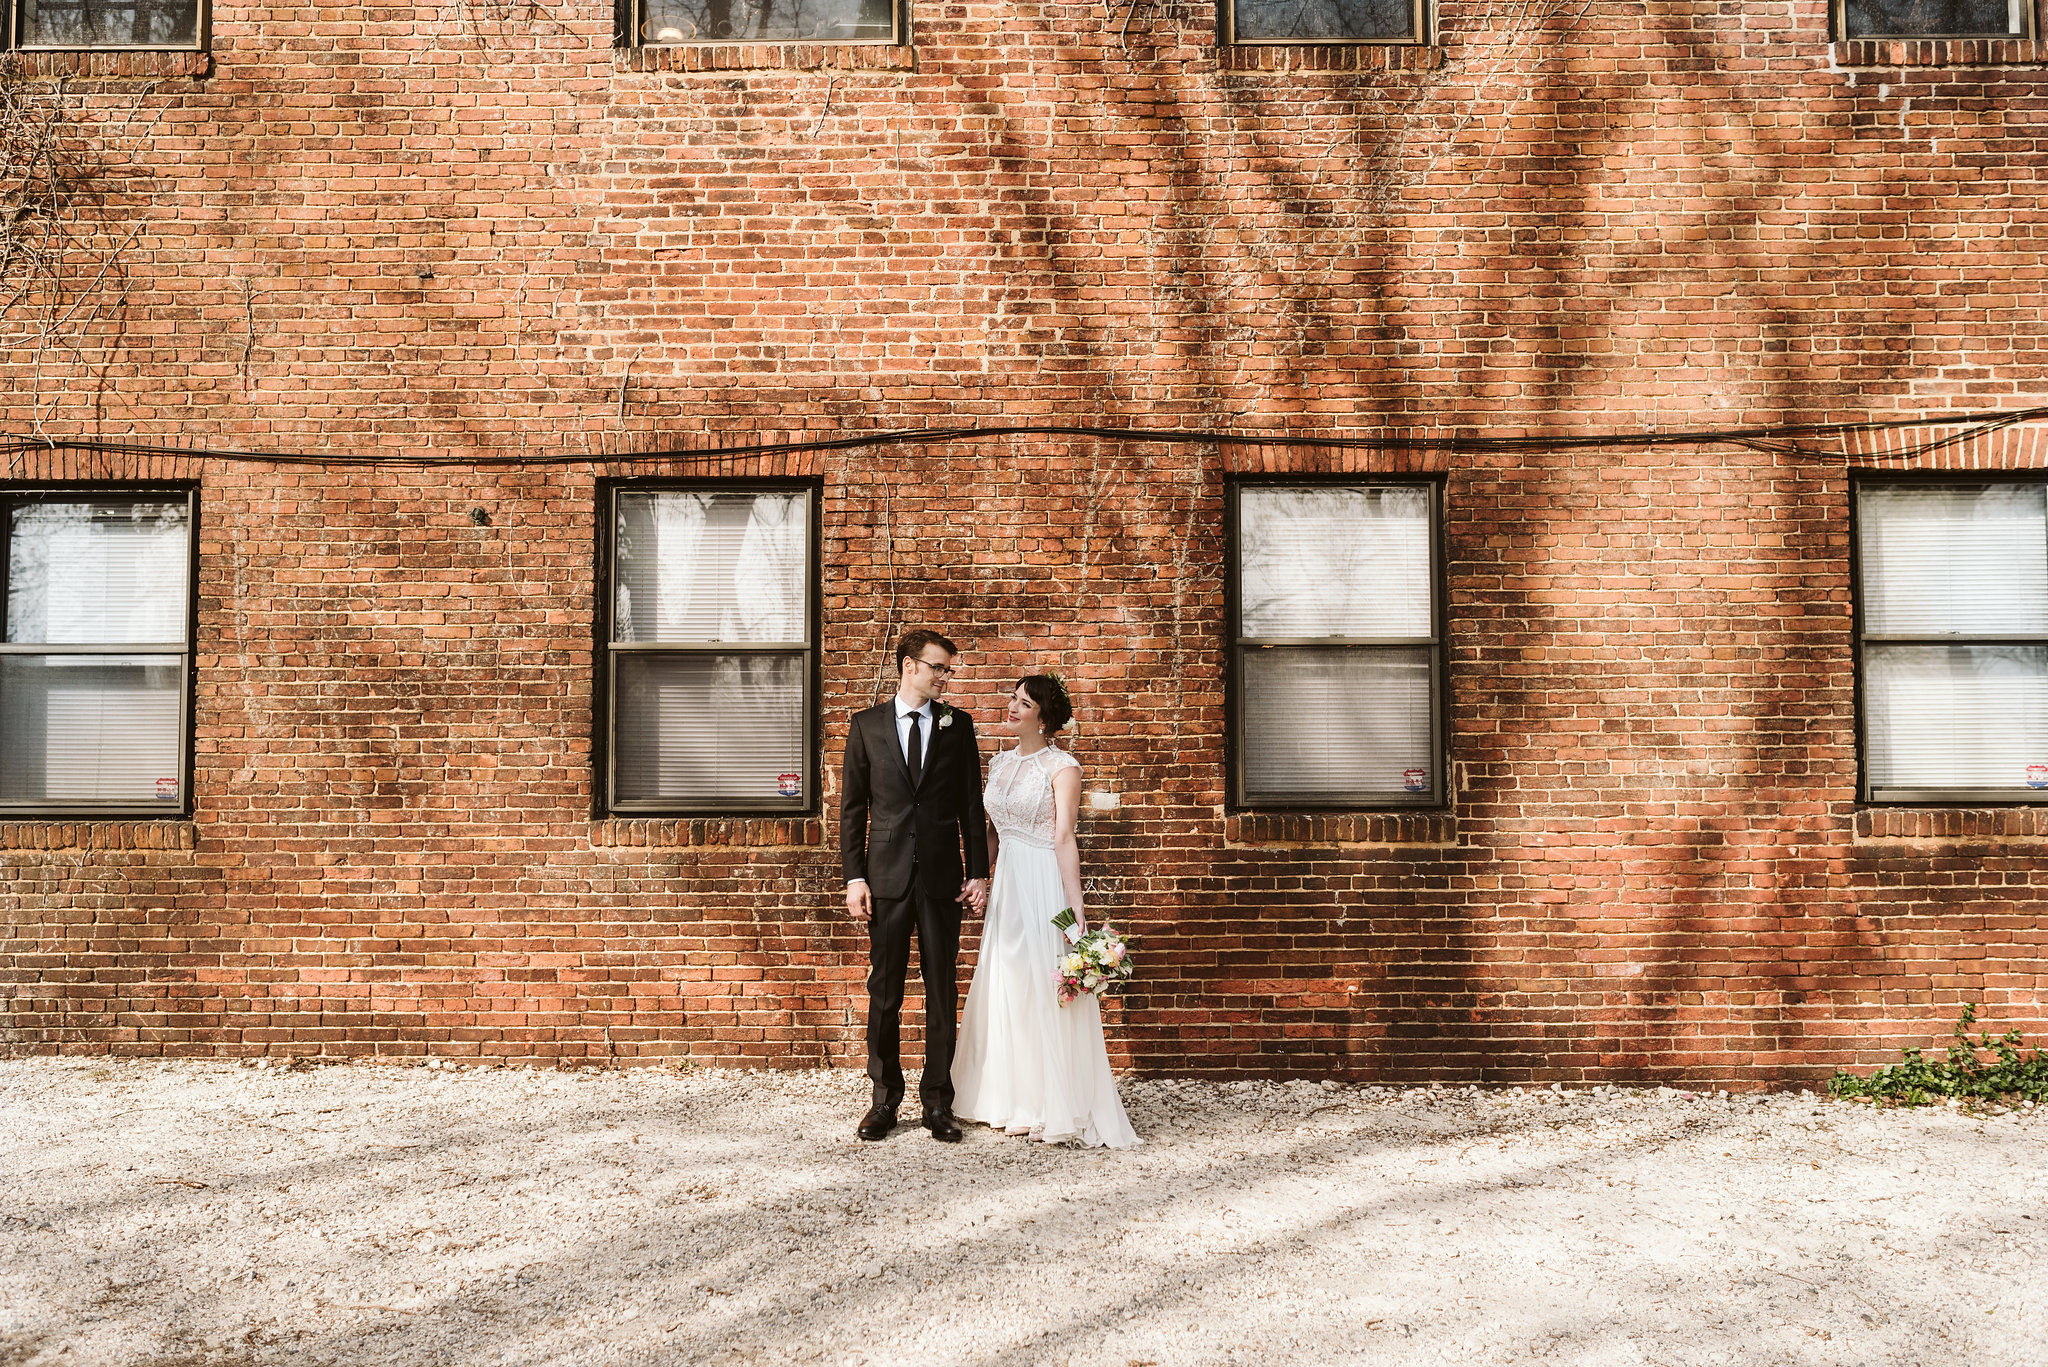  Baltimore, Maryland Wedding Photographer, Hampden, Eco-Friendly, Green, The Elm, Simple and Classic, Vintage, Portrait of Bride and Groom Holding Hands in Front of Brick Wall 